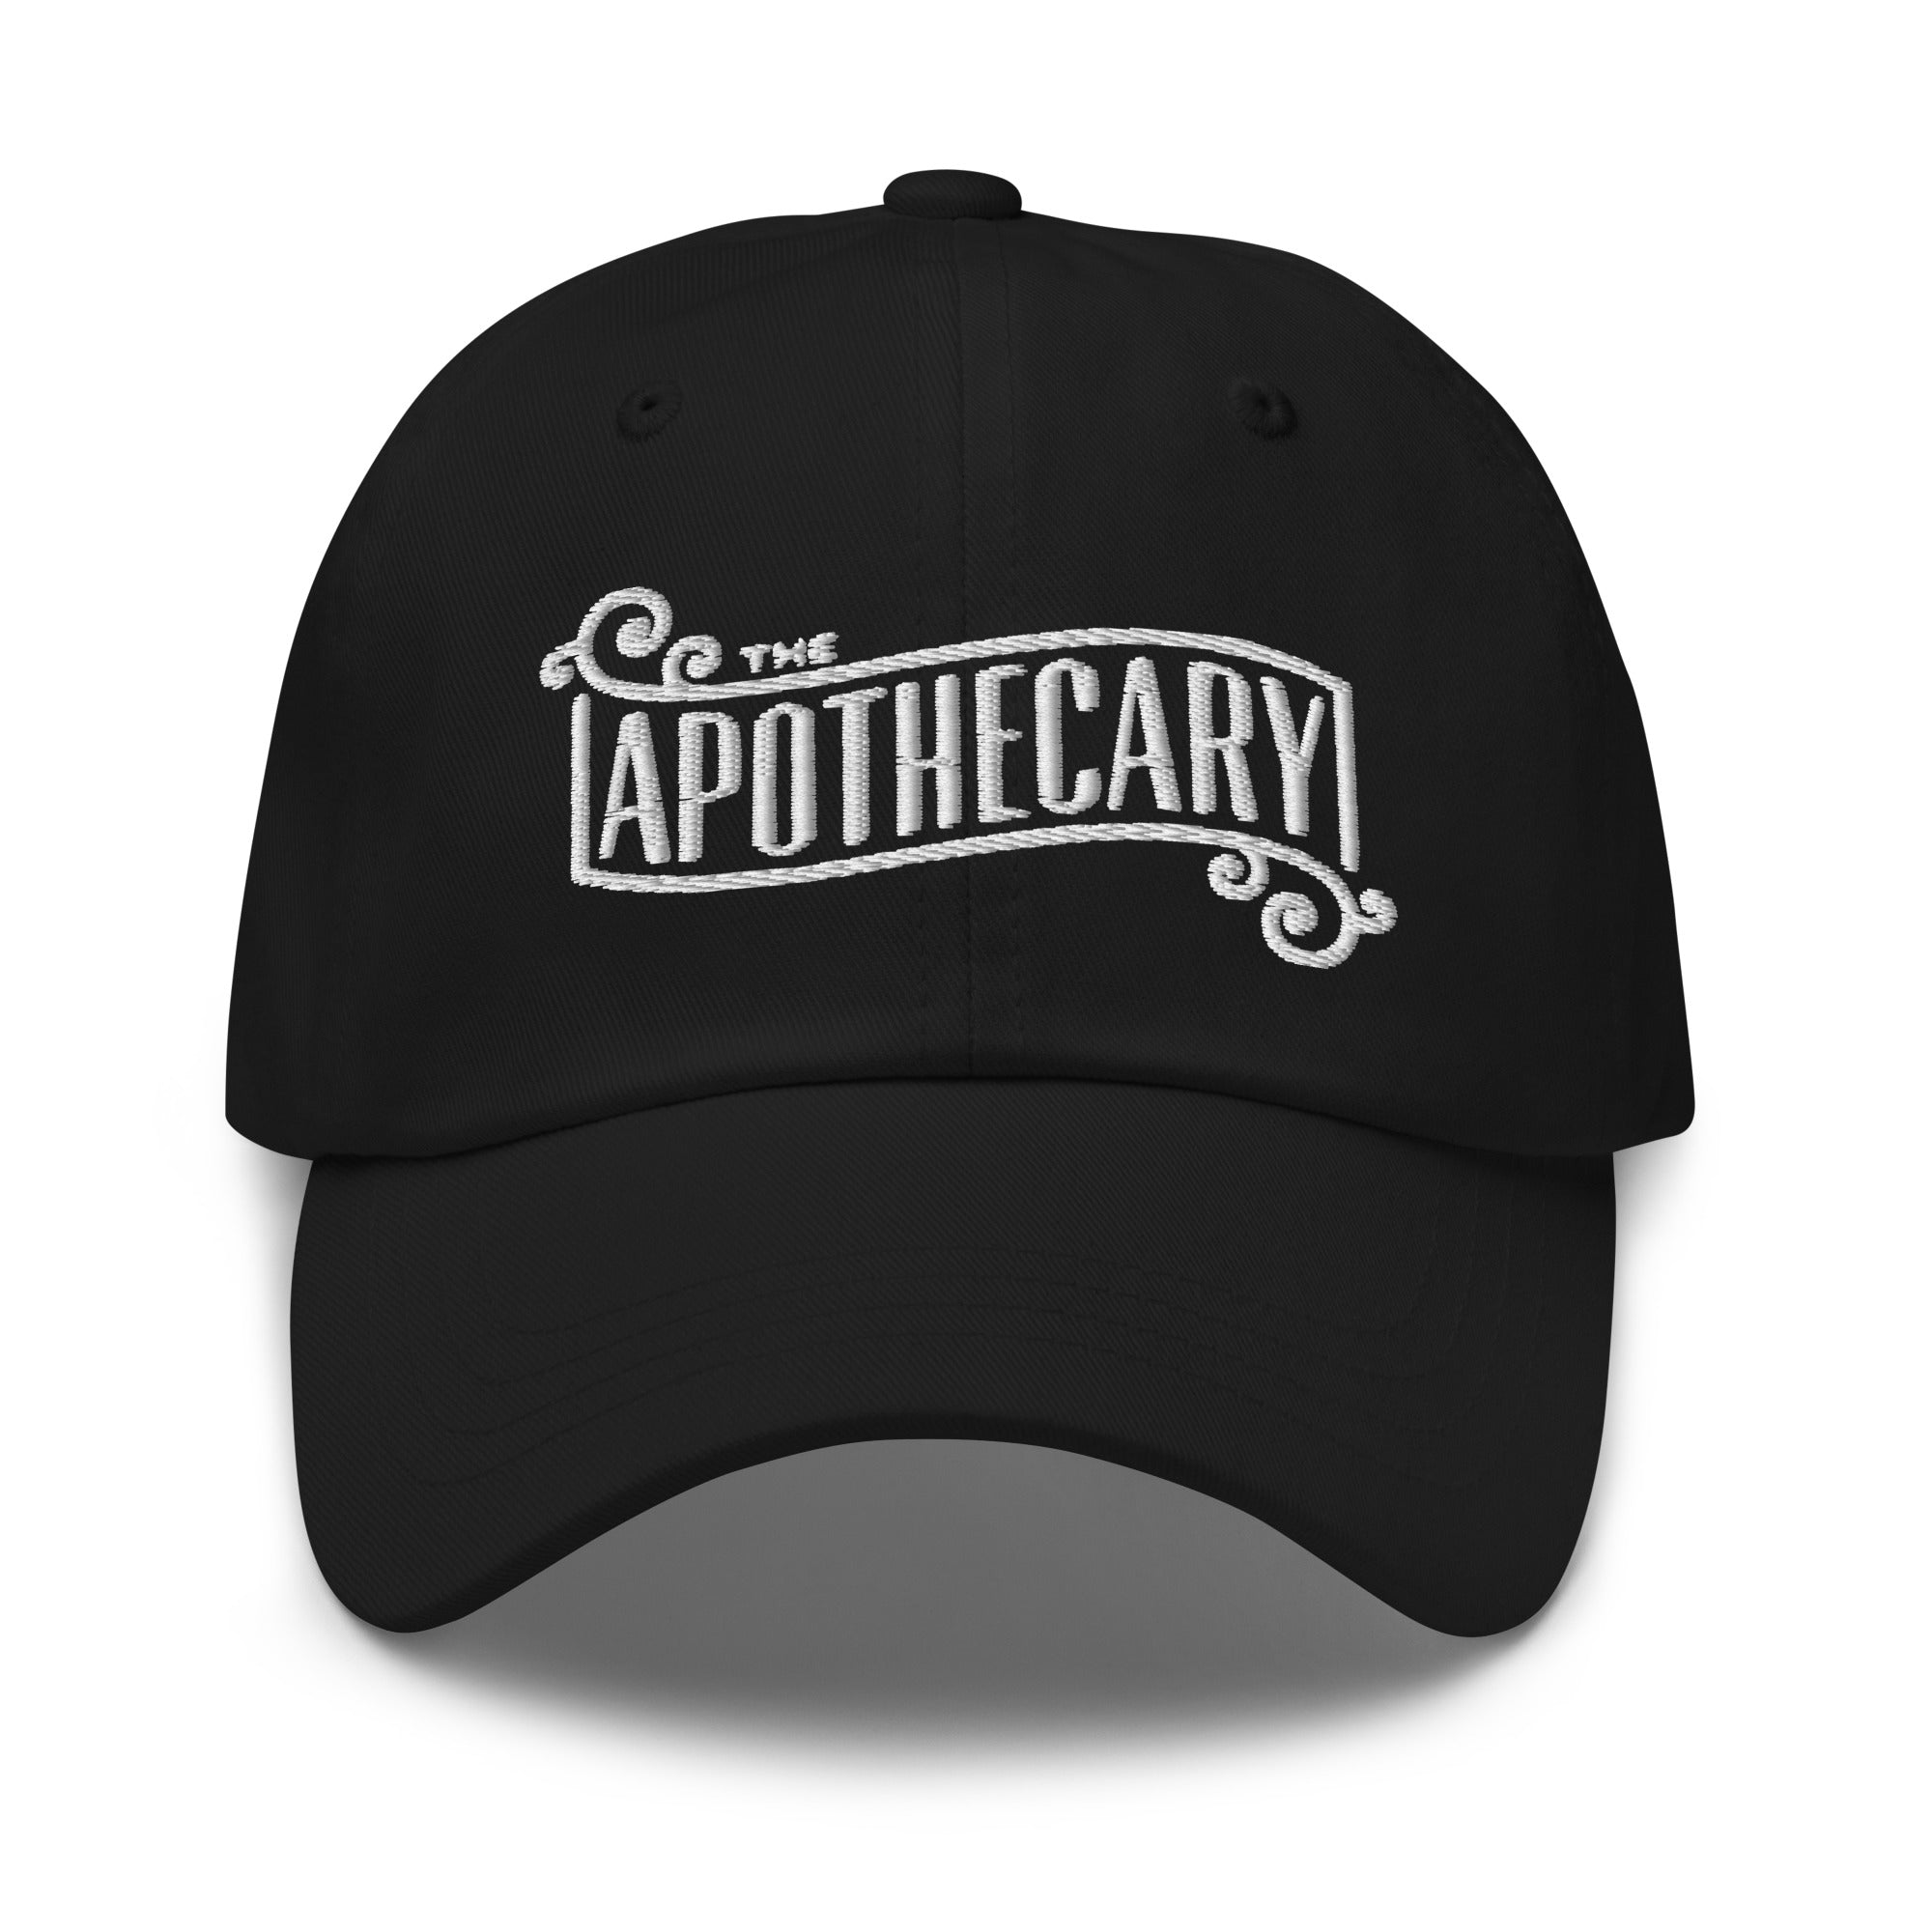 The Apothecary Embroidered Baseball Cap Steampunk Cosplay Dad hat - Edge of Life Designs